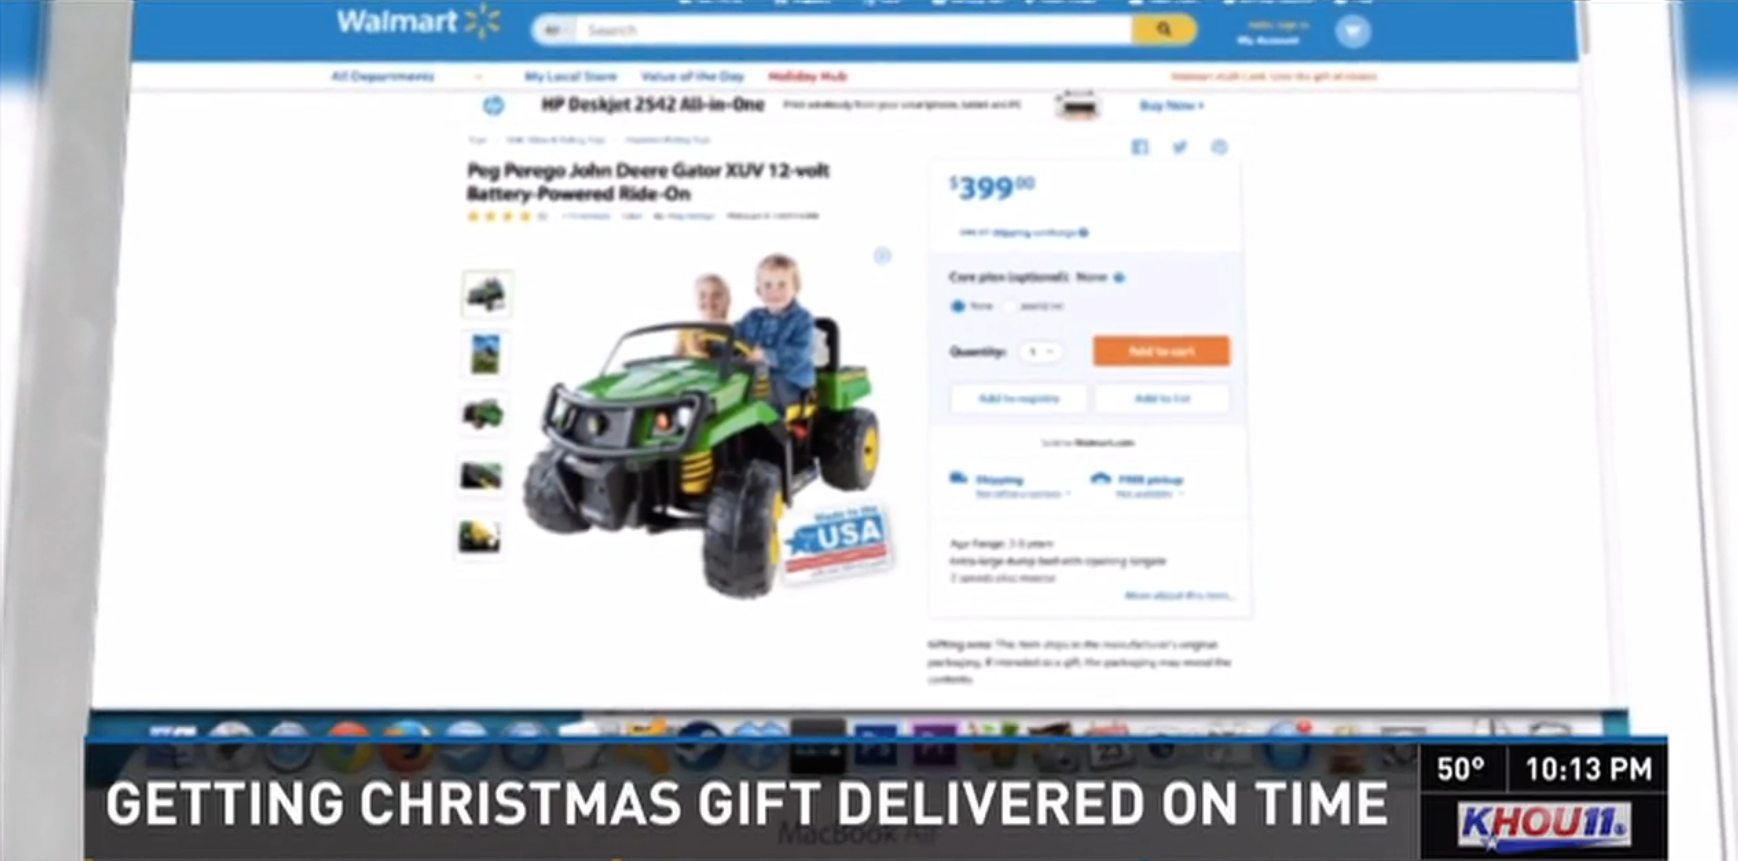 Walmart Loses Customer’s Black Friday Order, Tells Her To Re-Order At Full Price